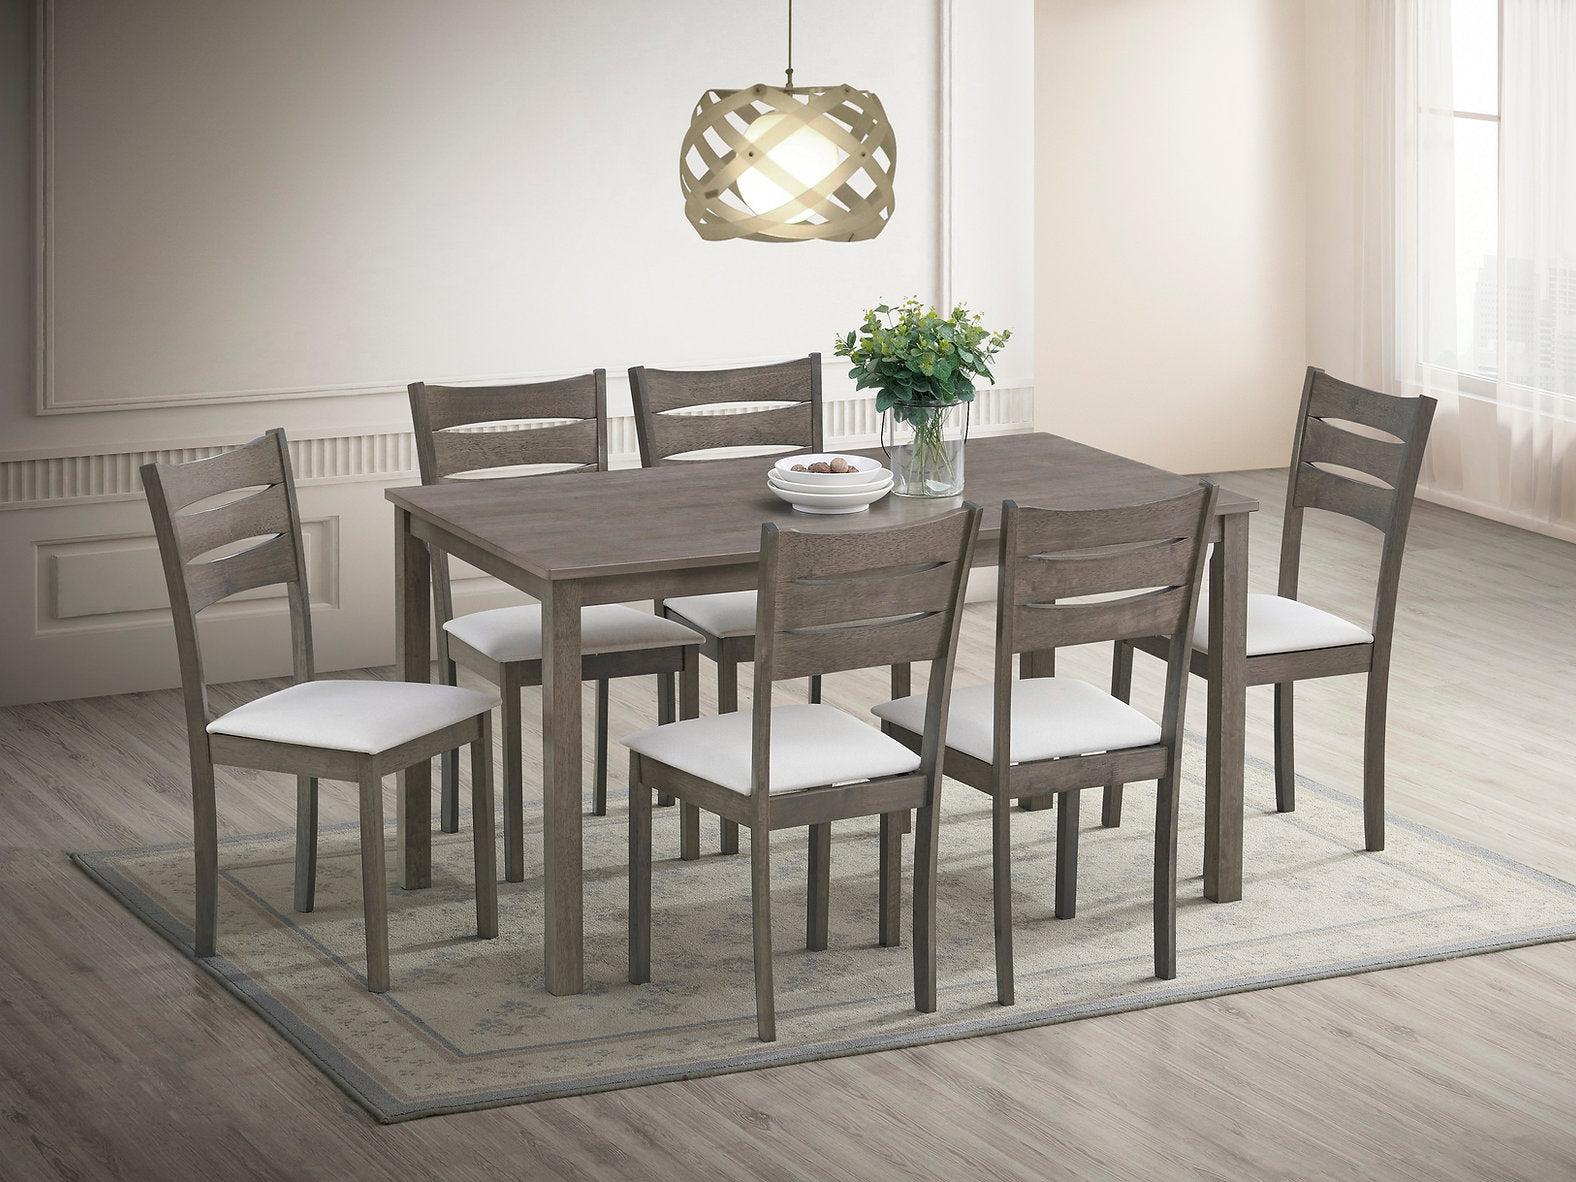 7 Pc Dining Set - Antique Grey Wood Table and Chairs  T-1051 | C-1052